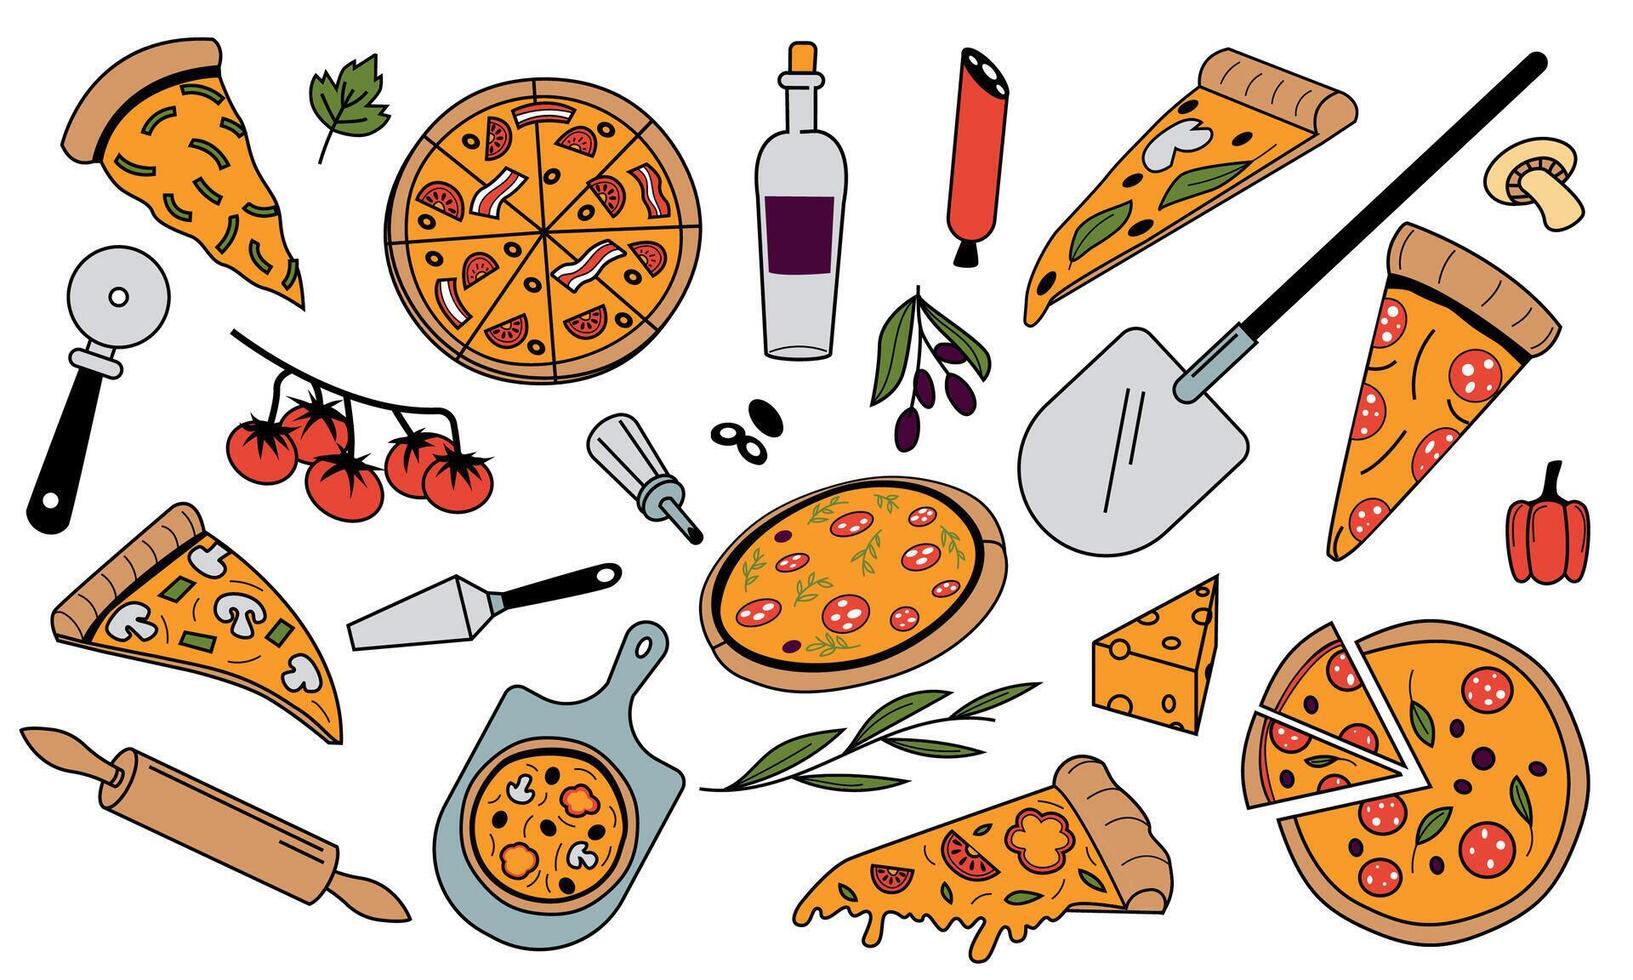 Doodle pizza ingredients. Colored national Italian cuisine food with cheese pepperoni tomato and olive oil. Vector restaurant menu graphic elements